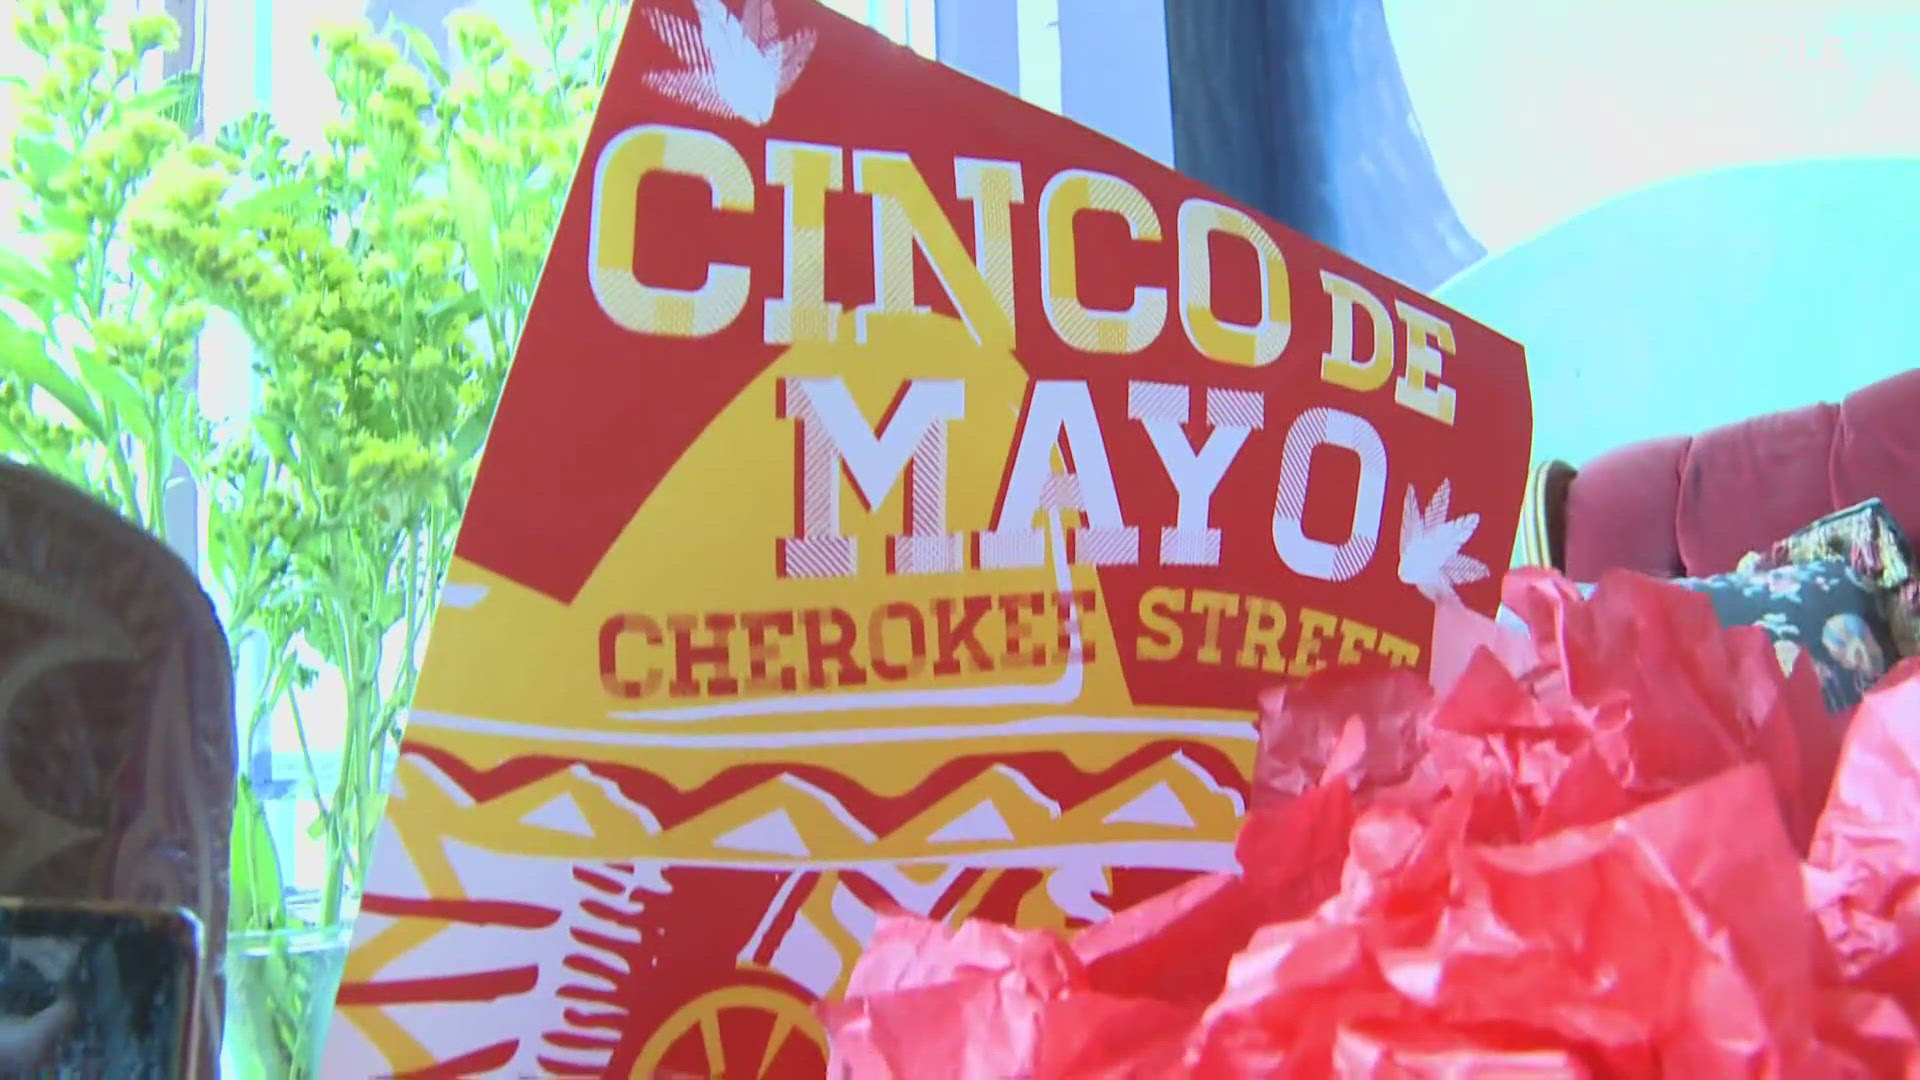 Contrary to popular belief, Cinco de Mayo is not Mexico's Independence Day. Here's the real story behind the holiday.